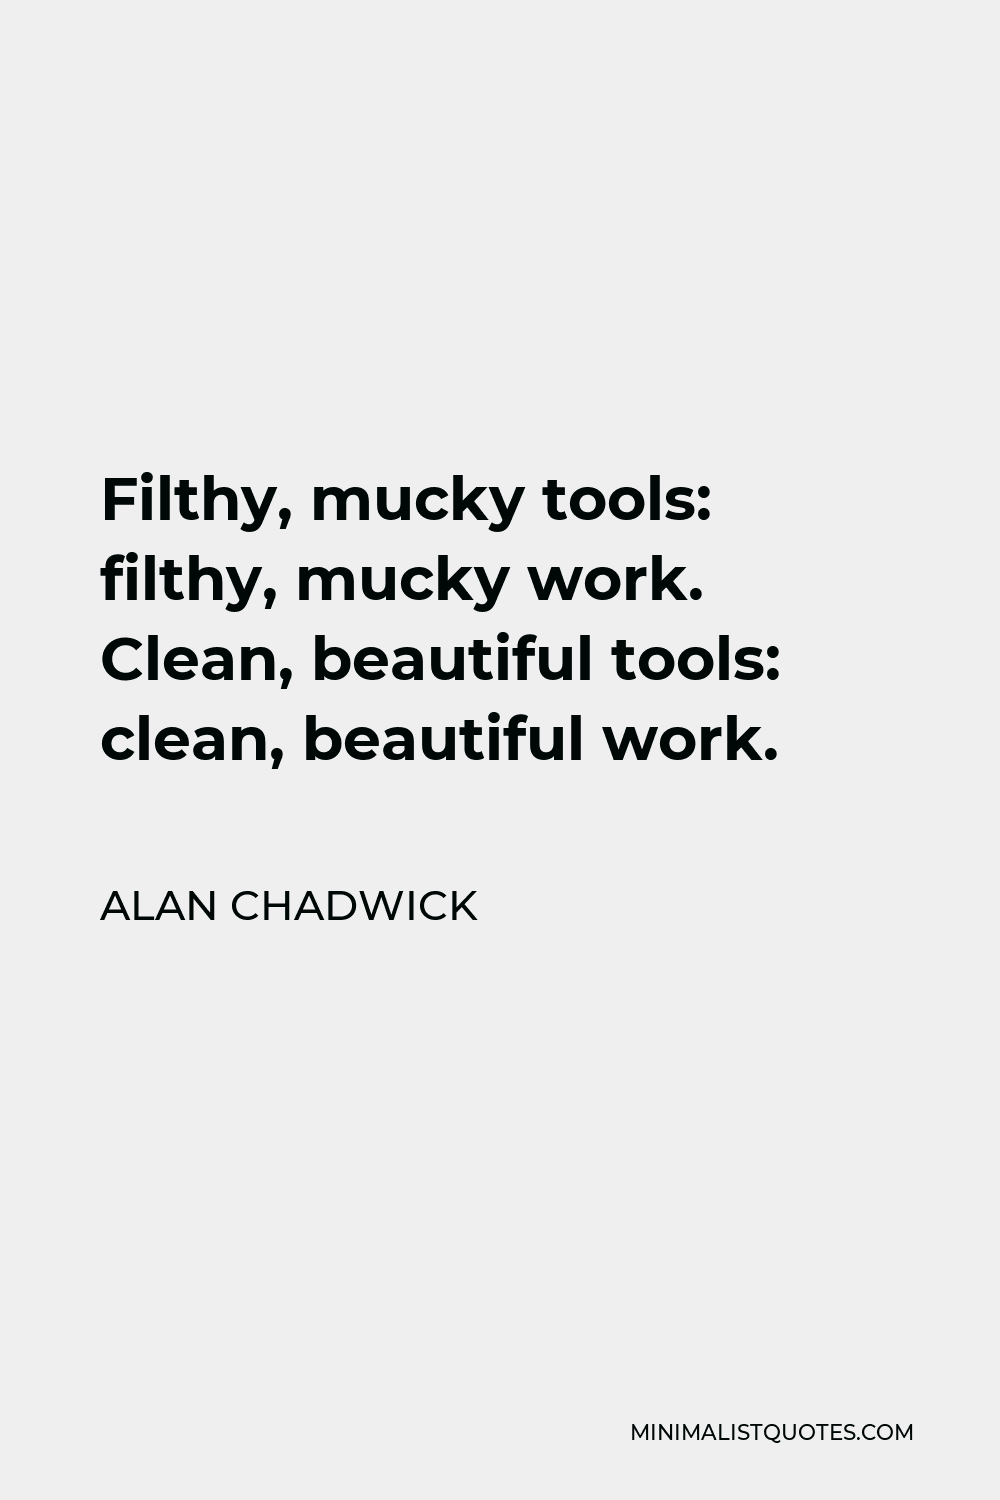 Alan Chadwick Quote - Filthy, mucky tools: filthy, mucky work. Clean, beautiful tools: clean, beautiful work.